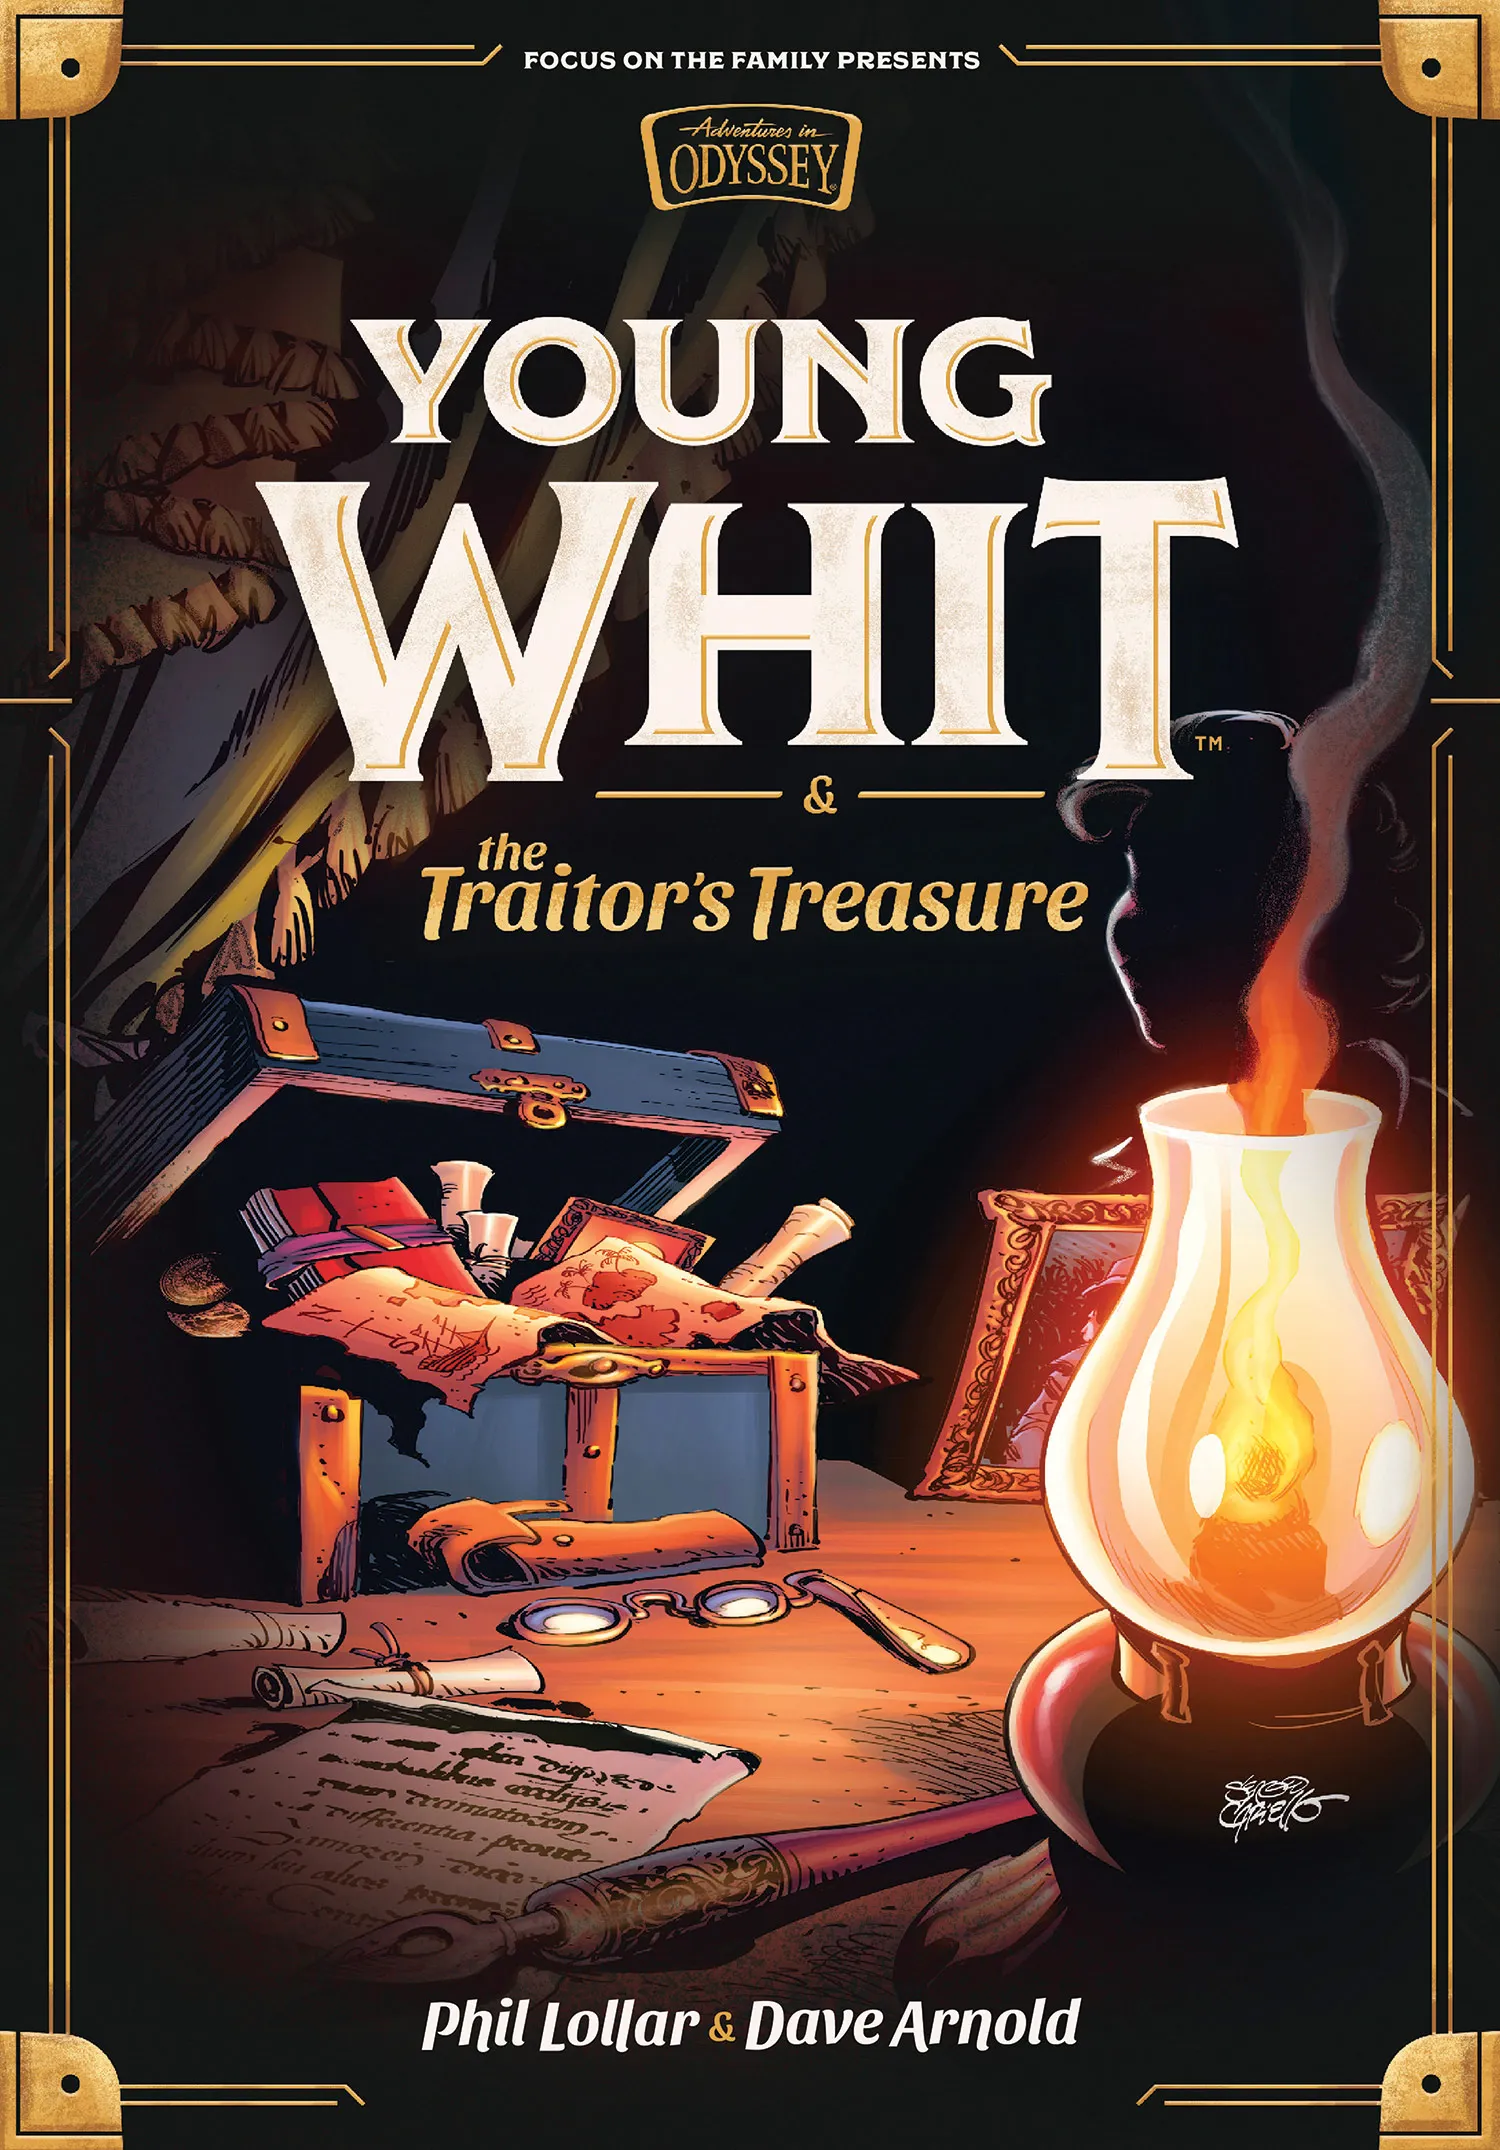 Young Whit and the Traitor's Treasure (Young Whit #1)